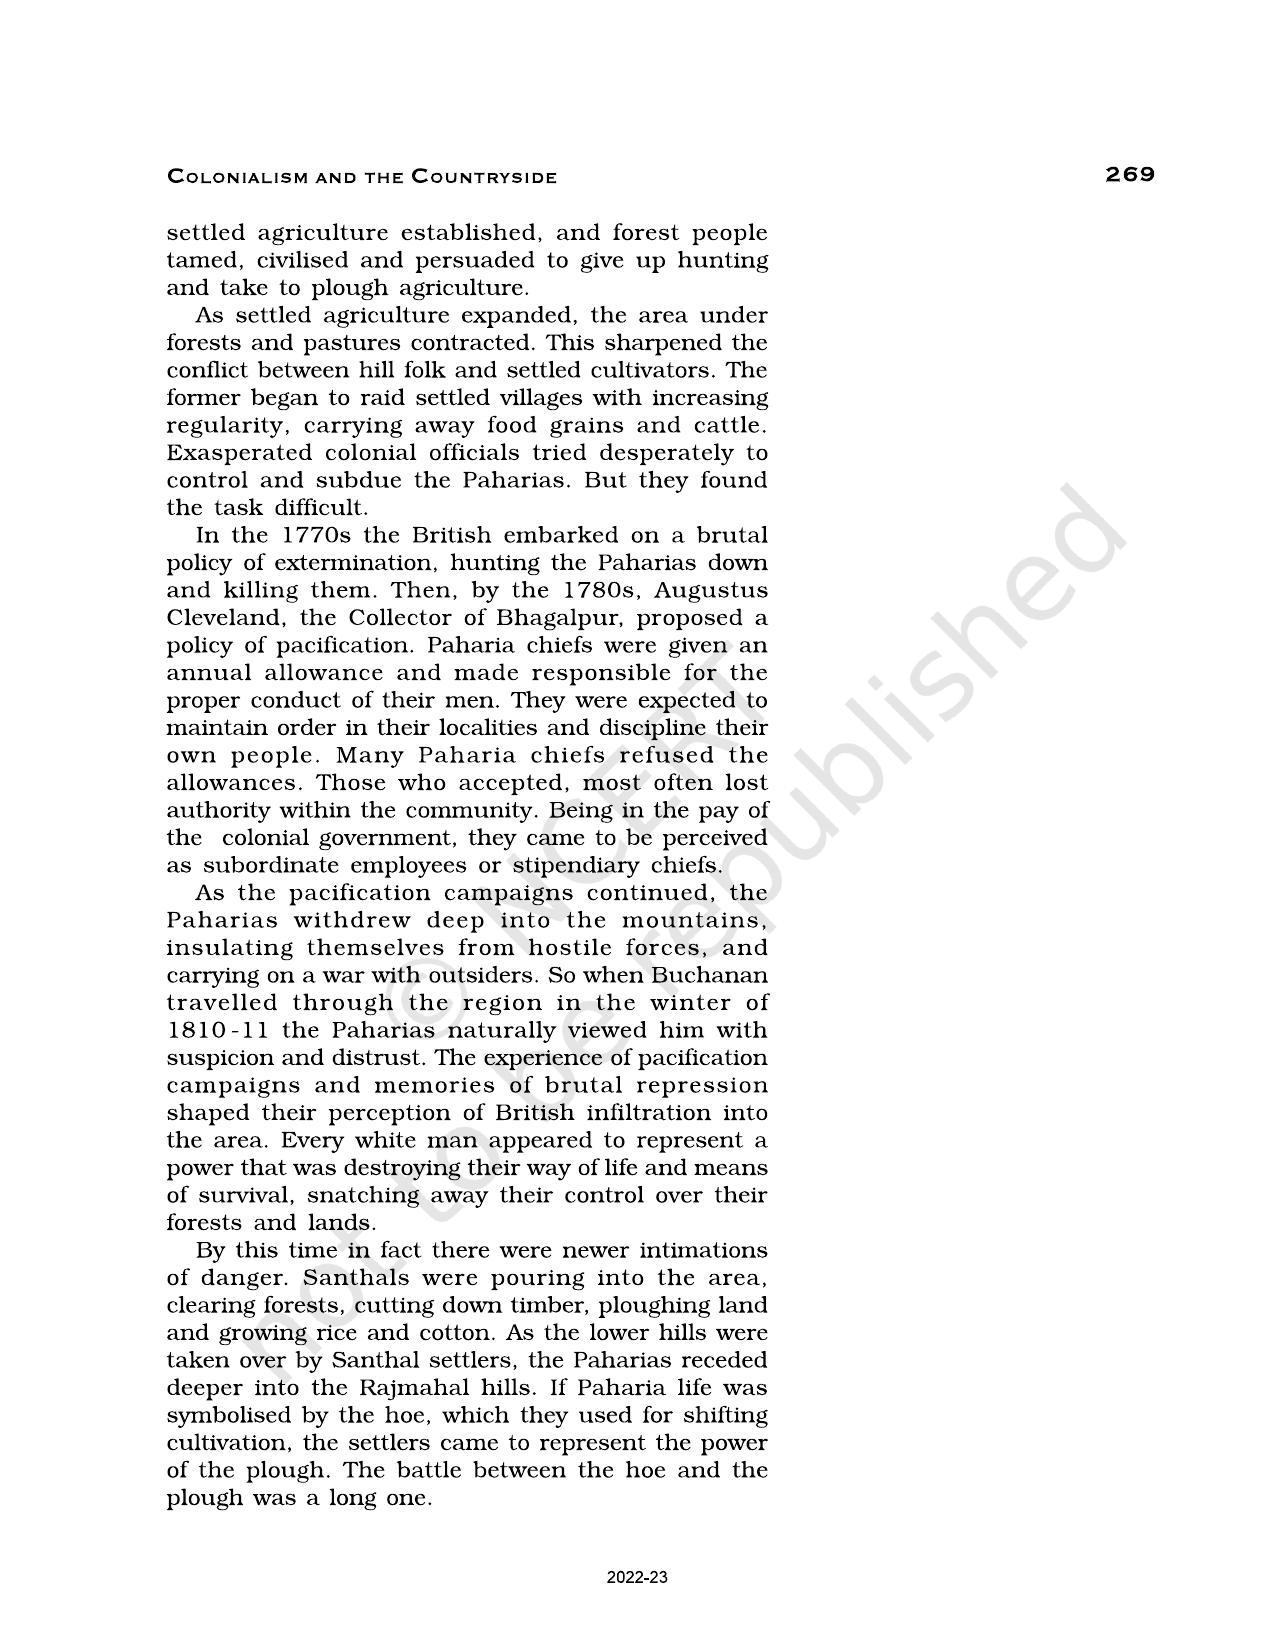 NCERT Book for Class 12 History (Part-II) Chapter 10 Colonialism and the Countryside - Page 13